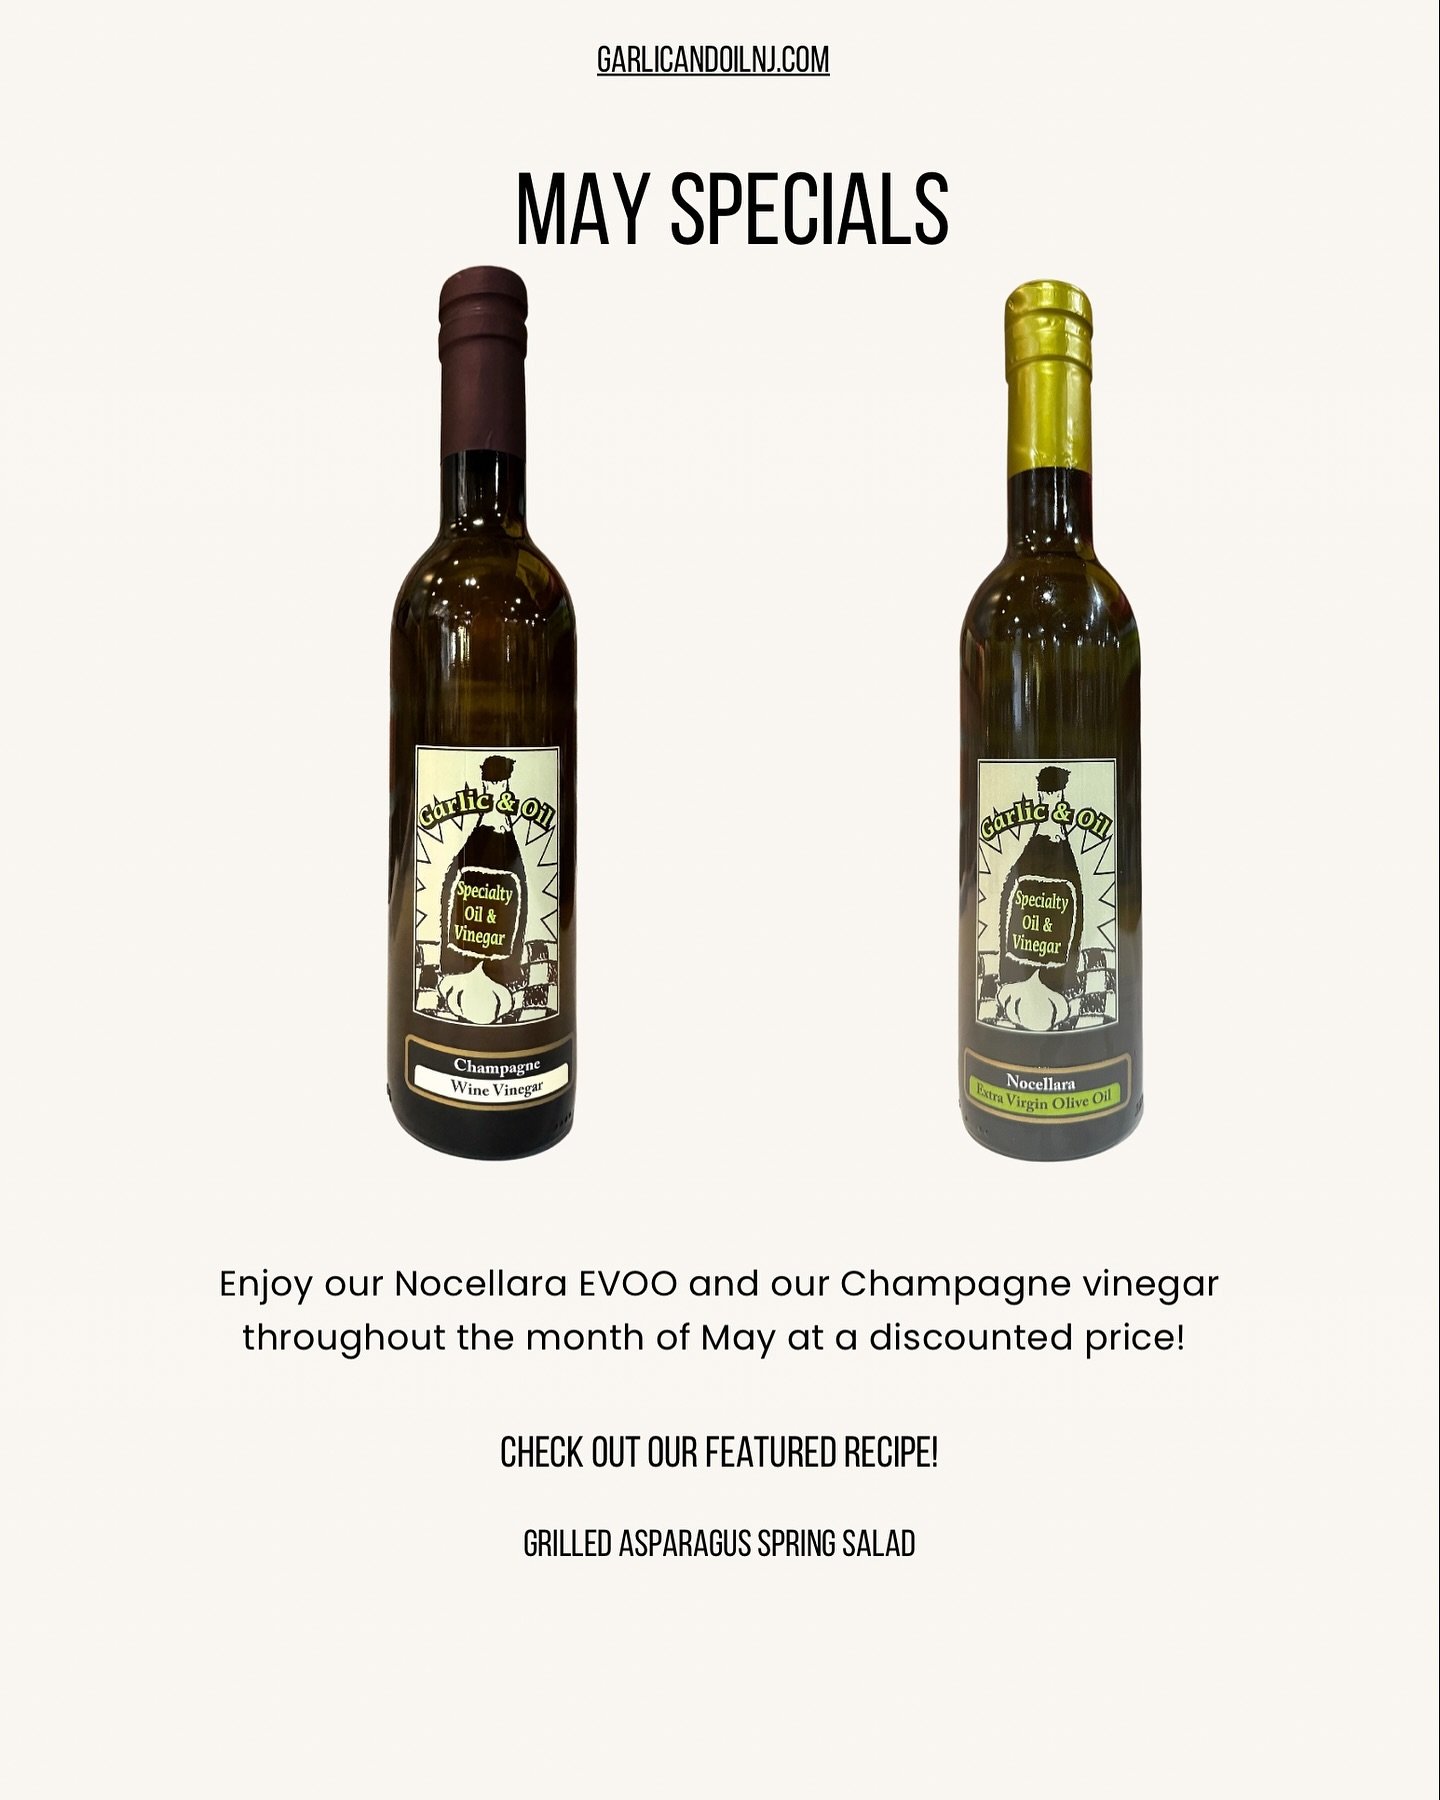 May specials are here!! Enjoy our Champagne vinegar and Nocellara EVOO at a discounted price for the entire month.